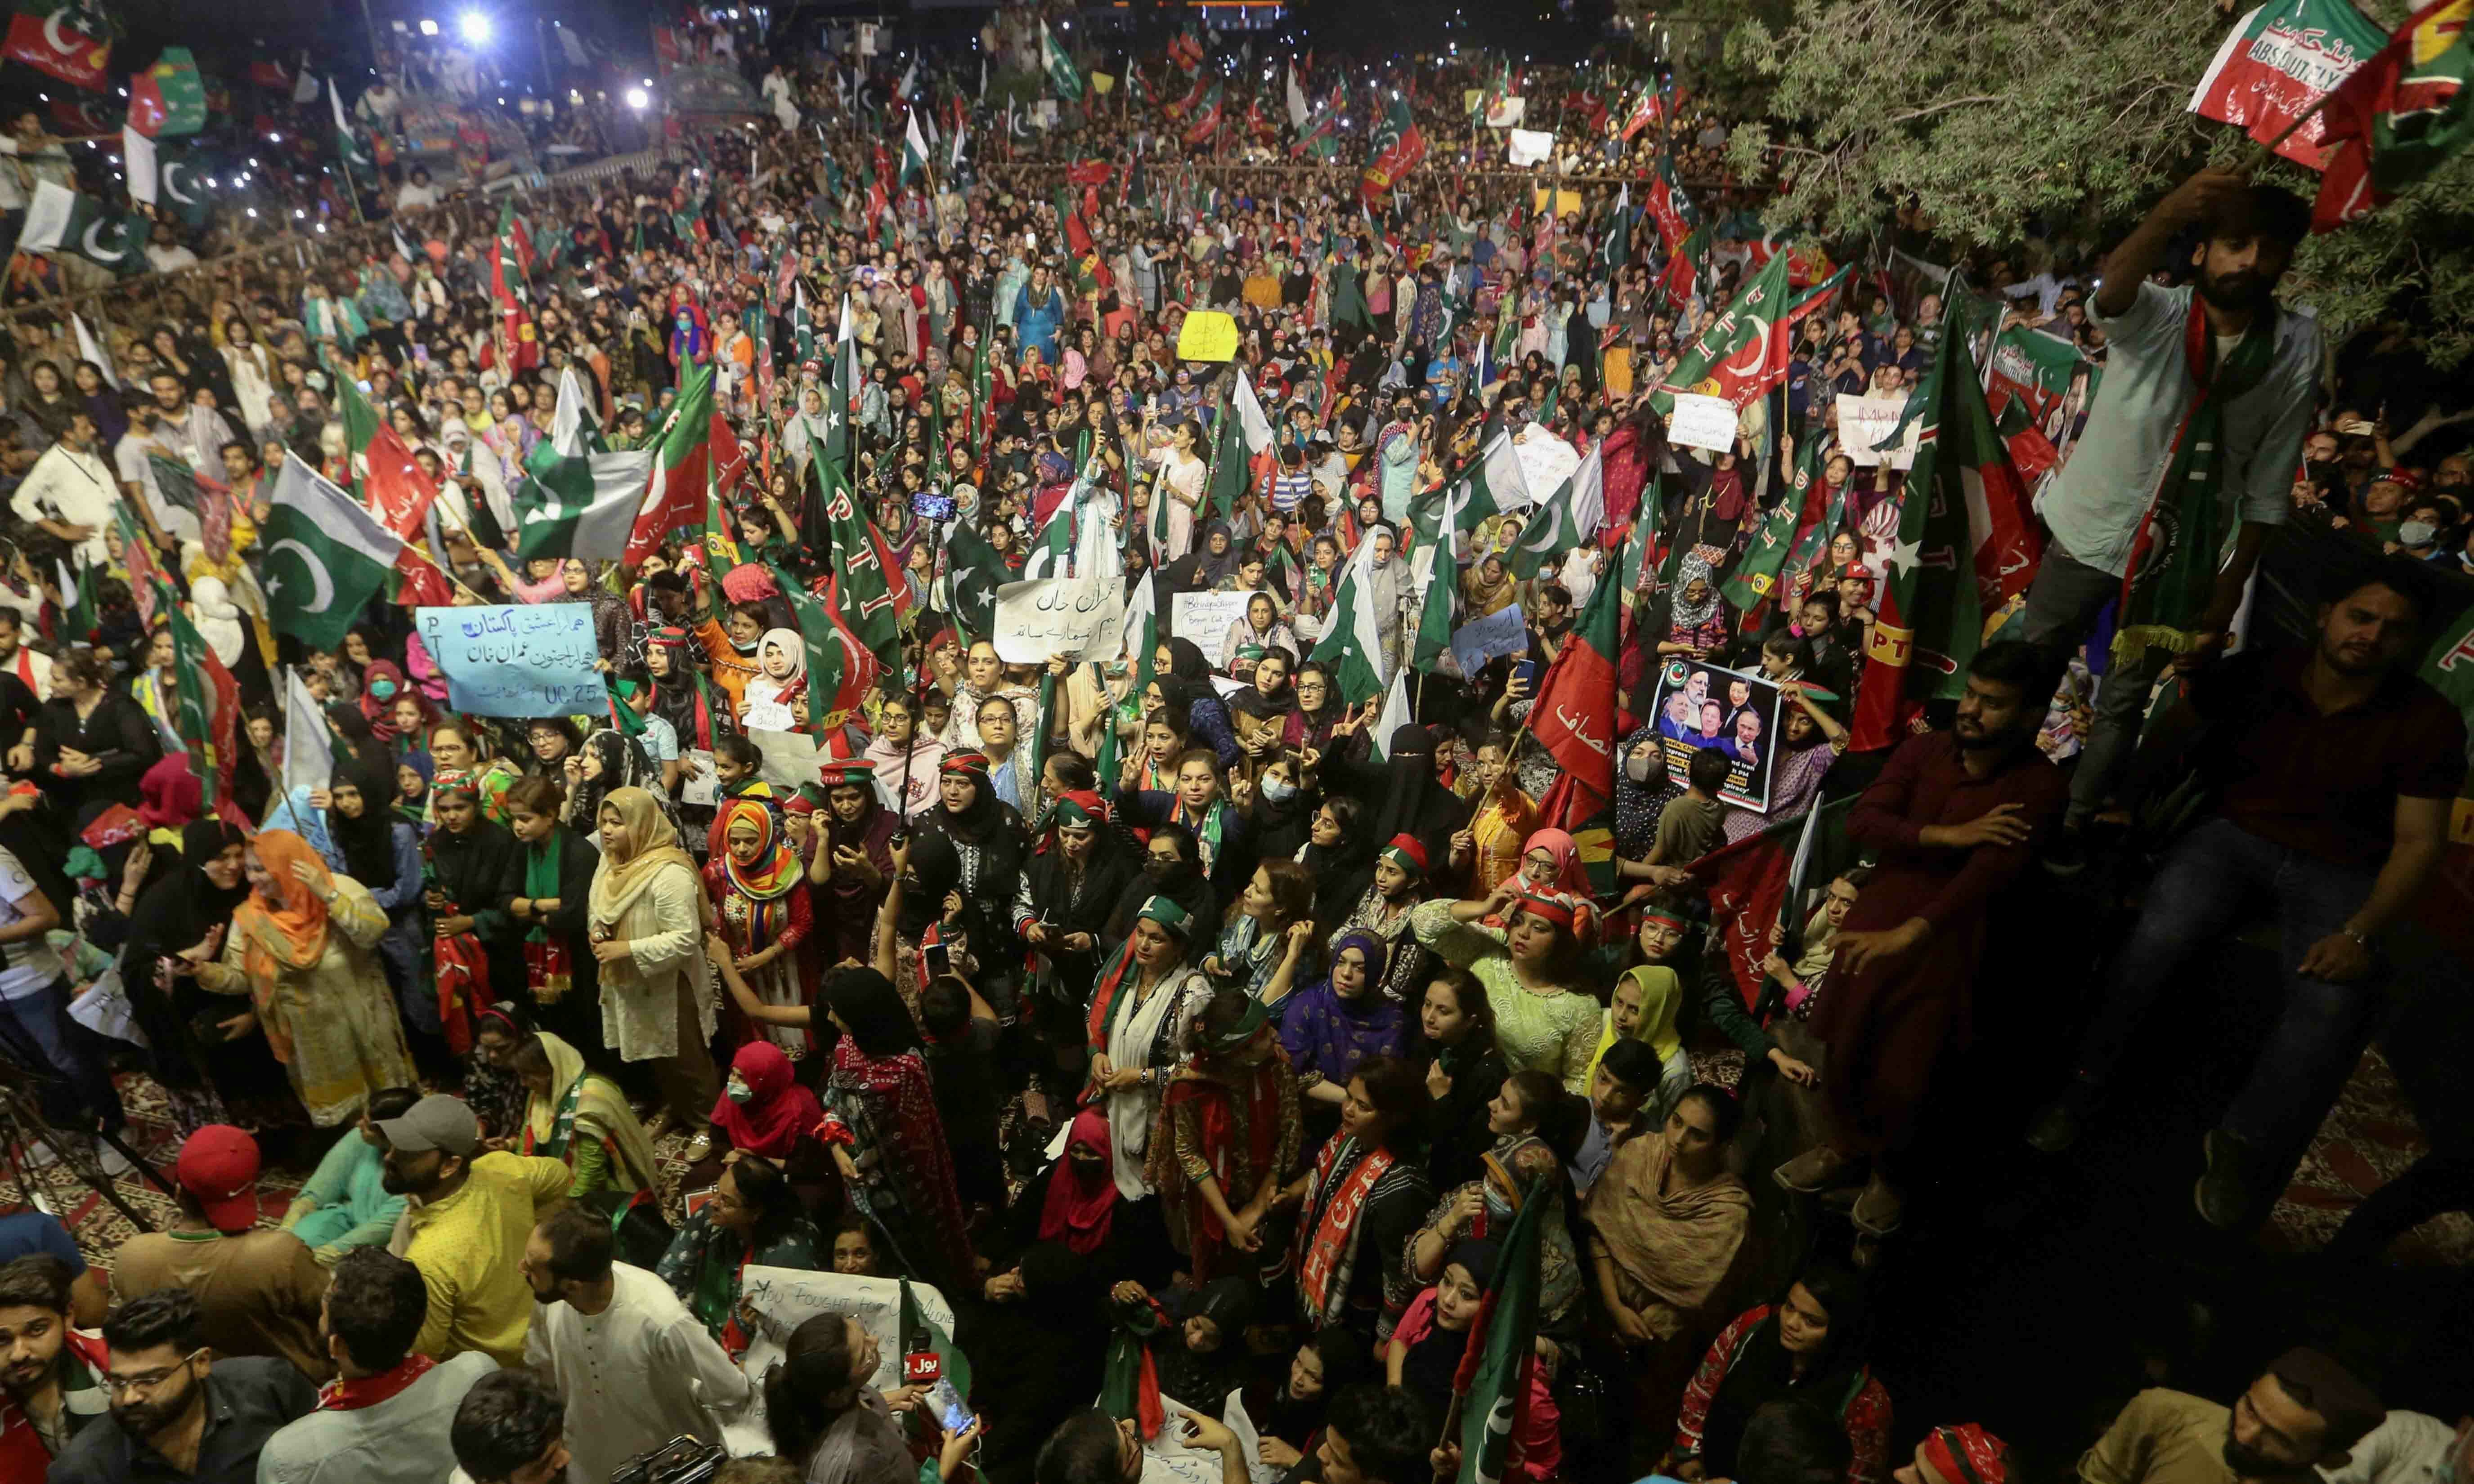 PTI supporters rally in support of former prime minister Imran Khan in Karachi on April 10. — Reuters